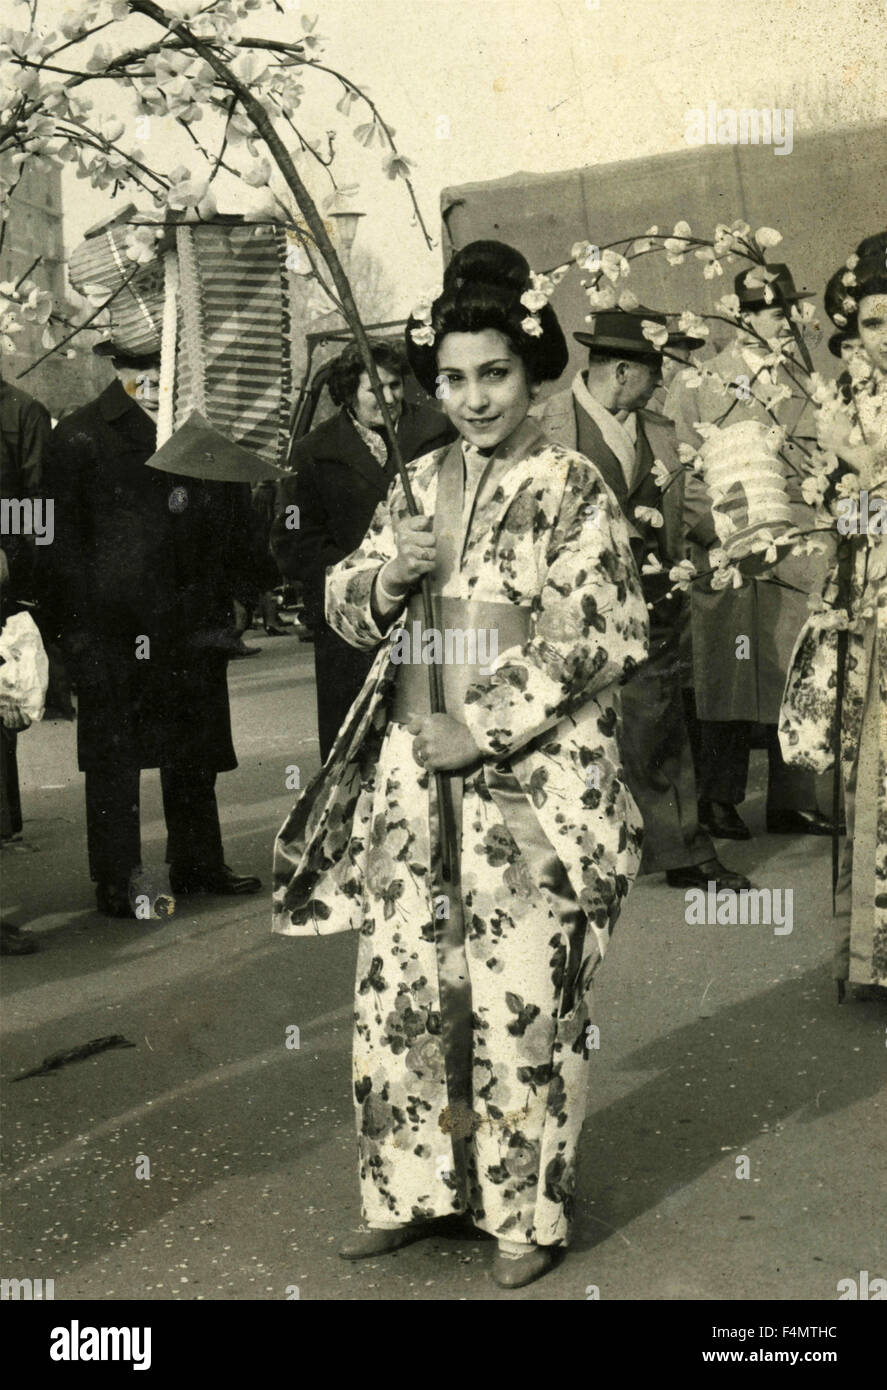 Japanese women in kimonos paraded with flowers Stock Photo